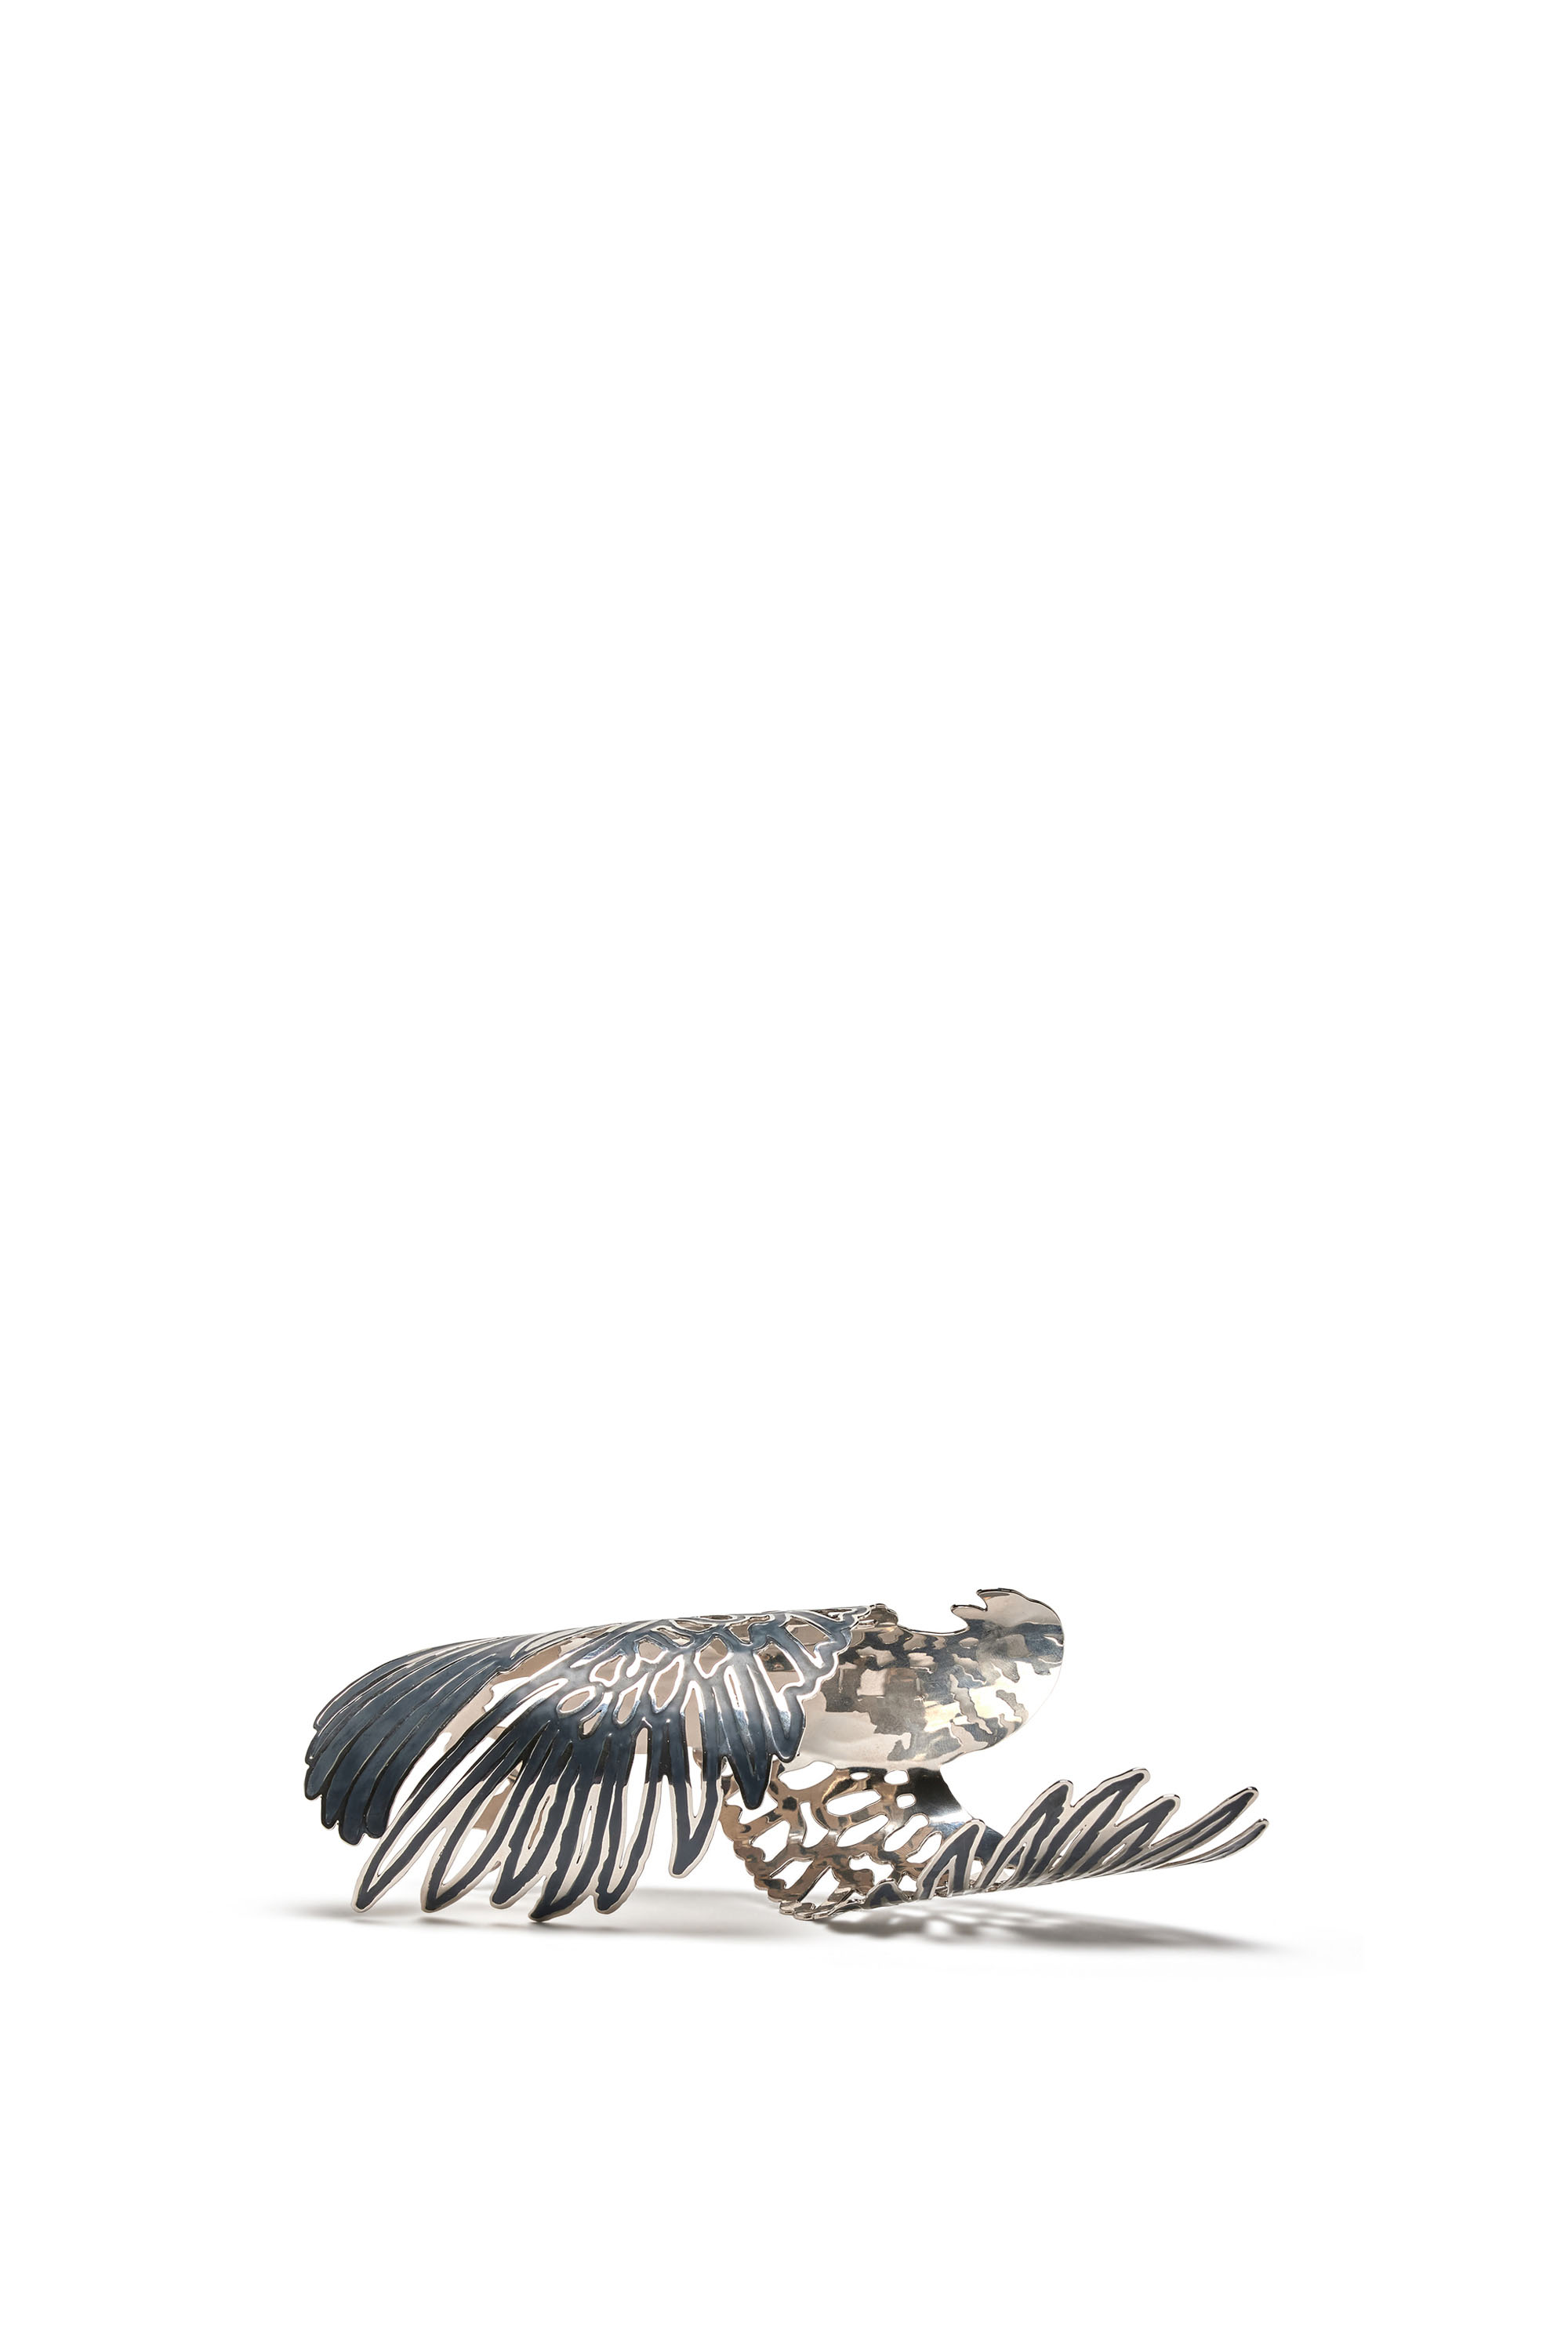 Diesel - EAGLE ARMBAND, Woman Eagle arm cuff in Silver - Image 3